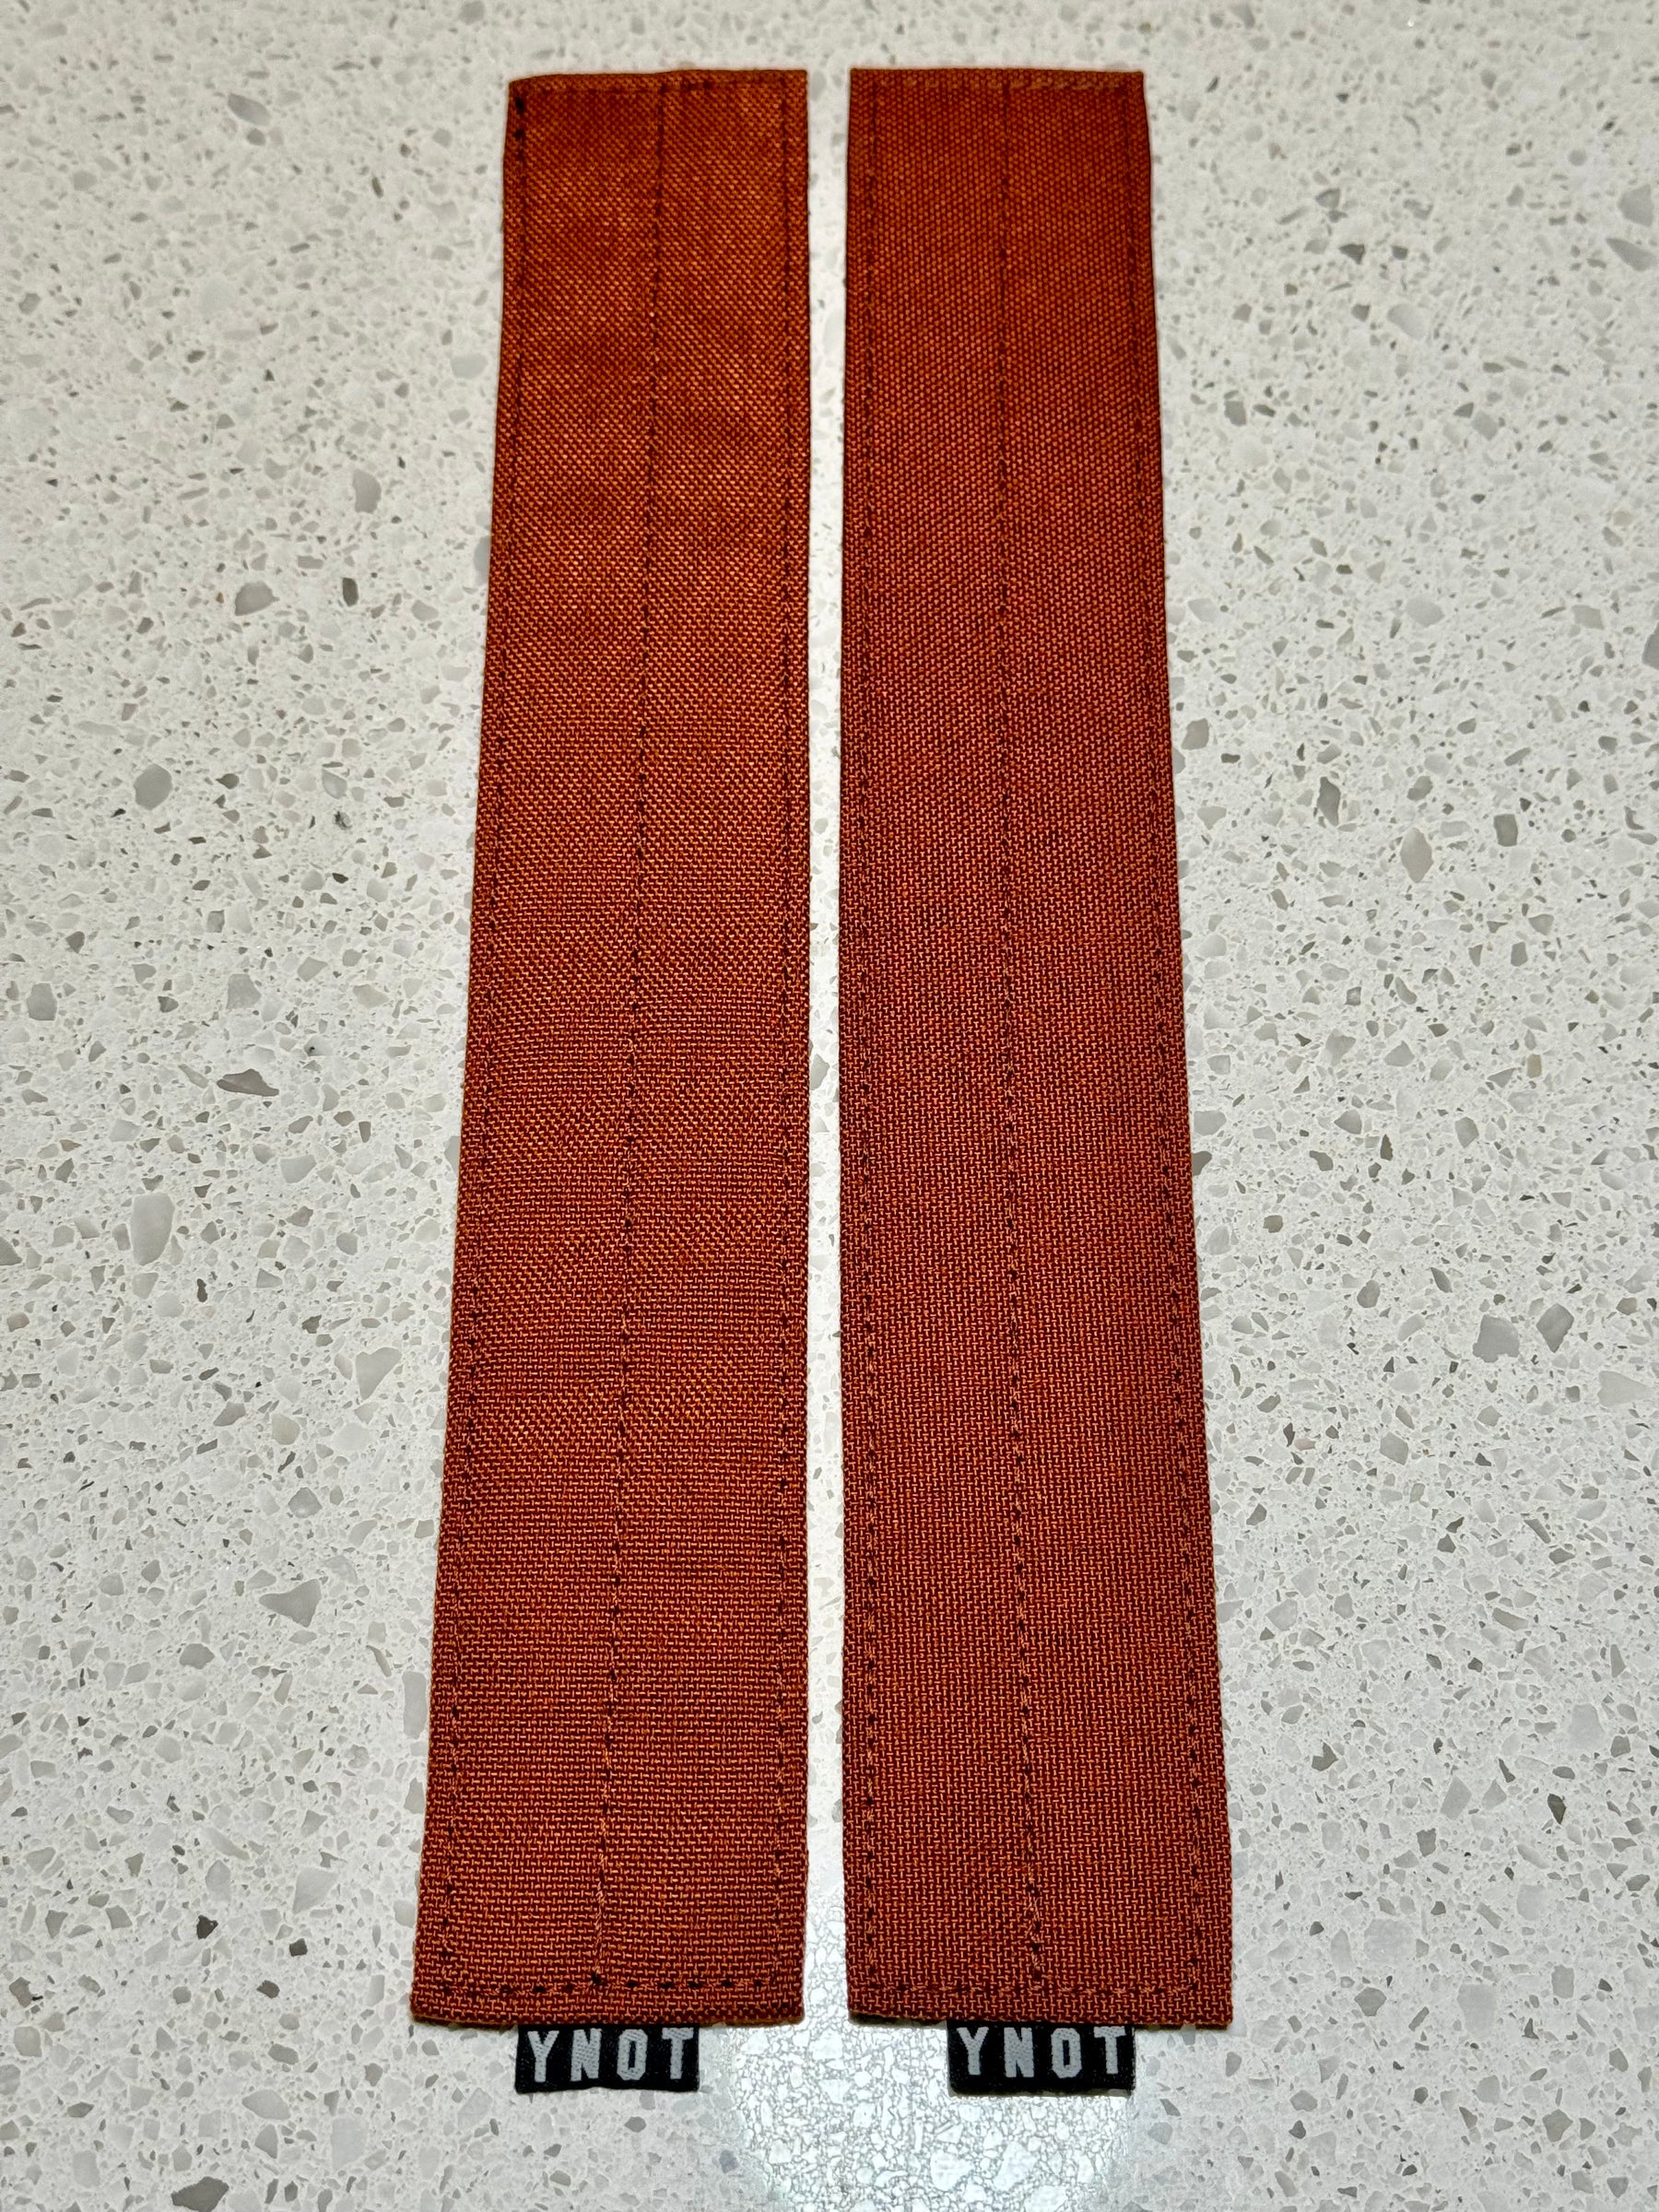 Pedal Straps - Factory Seconds (BOTTOMS SOLD SEPARATELY!)